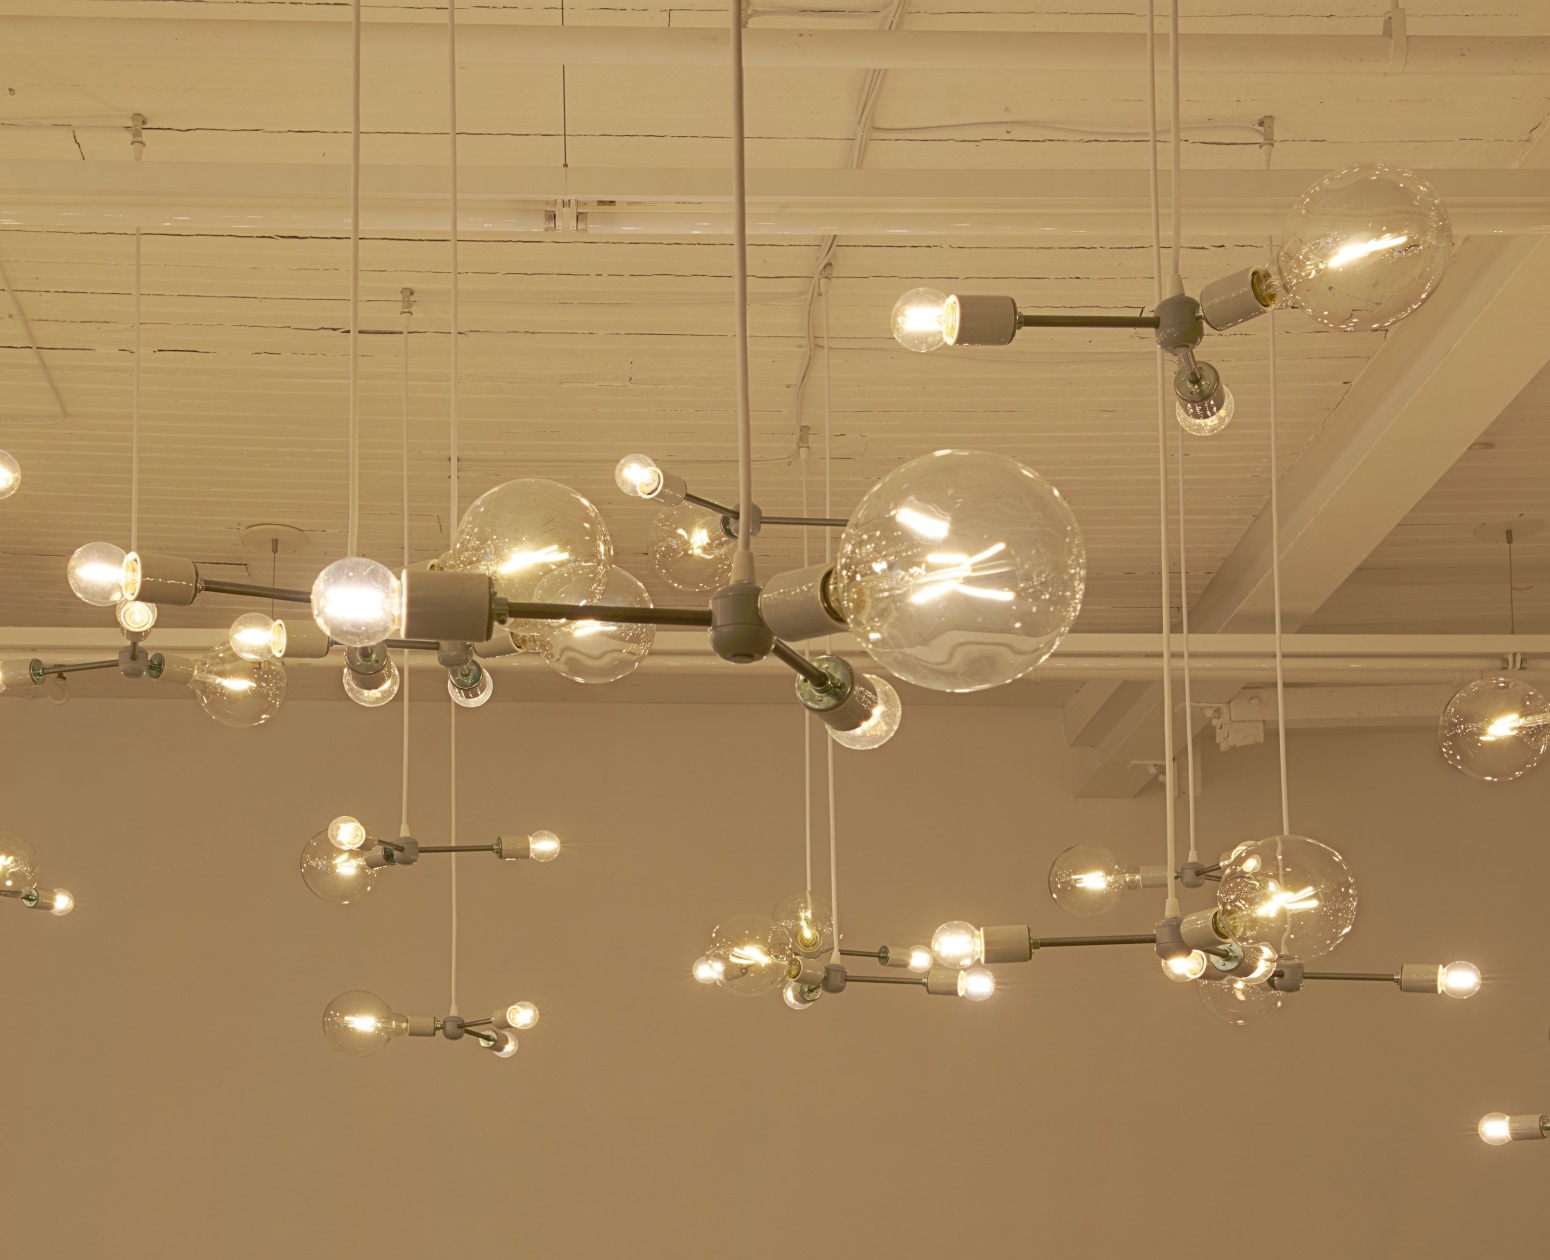 Image of SPENCER FINCH's installation titled Cloud (H2O), 2006